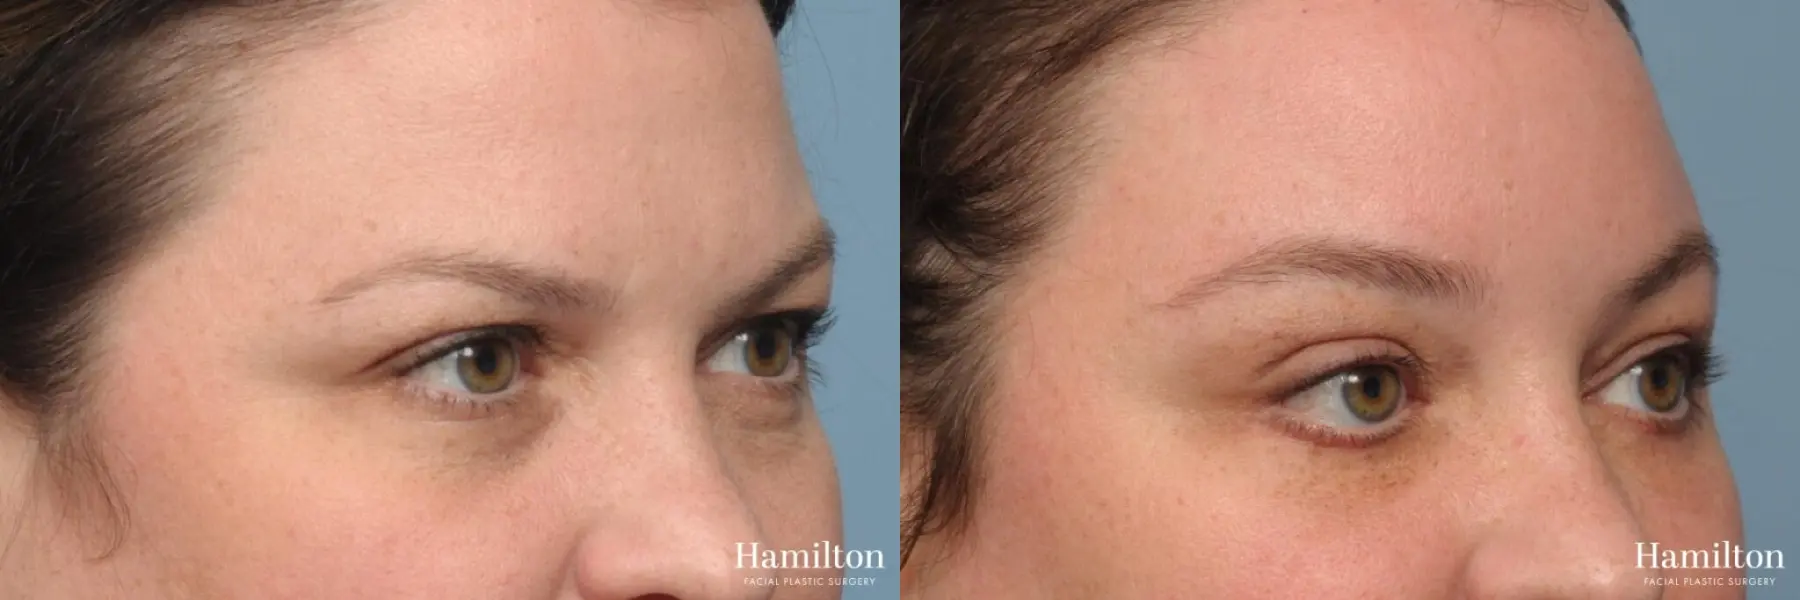 Brow Lift: Patient 1 - Before and After 4